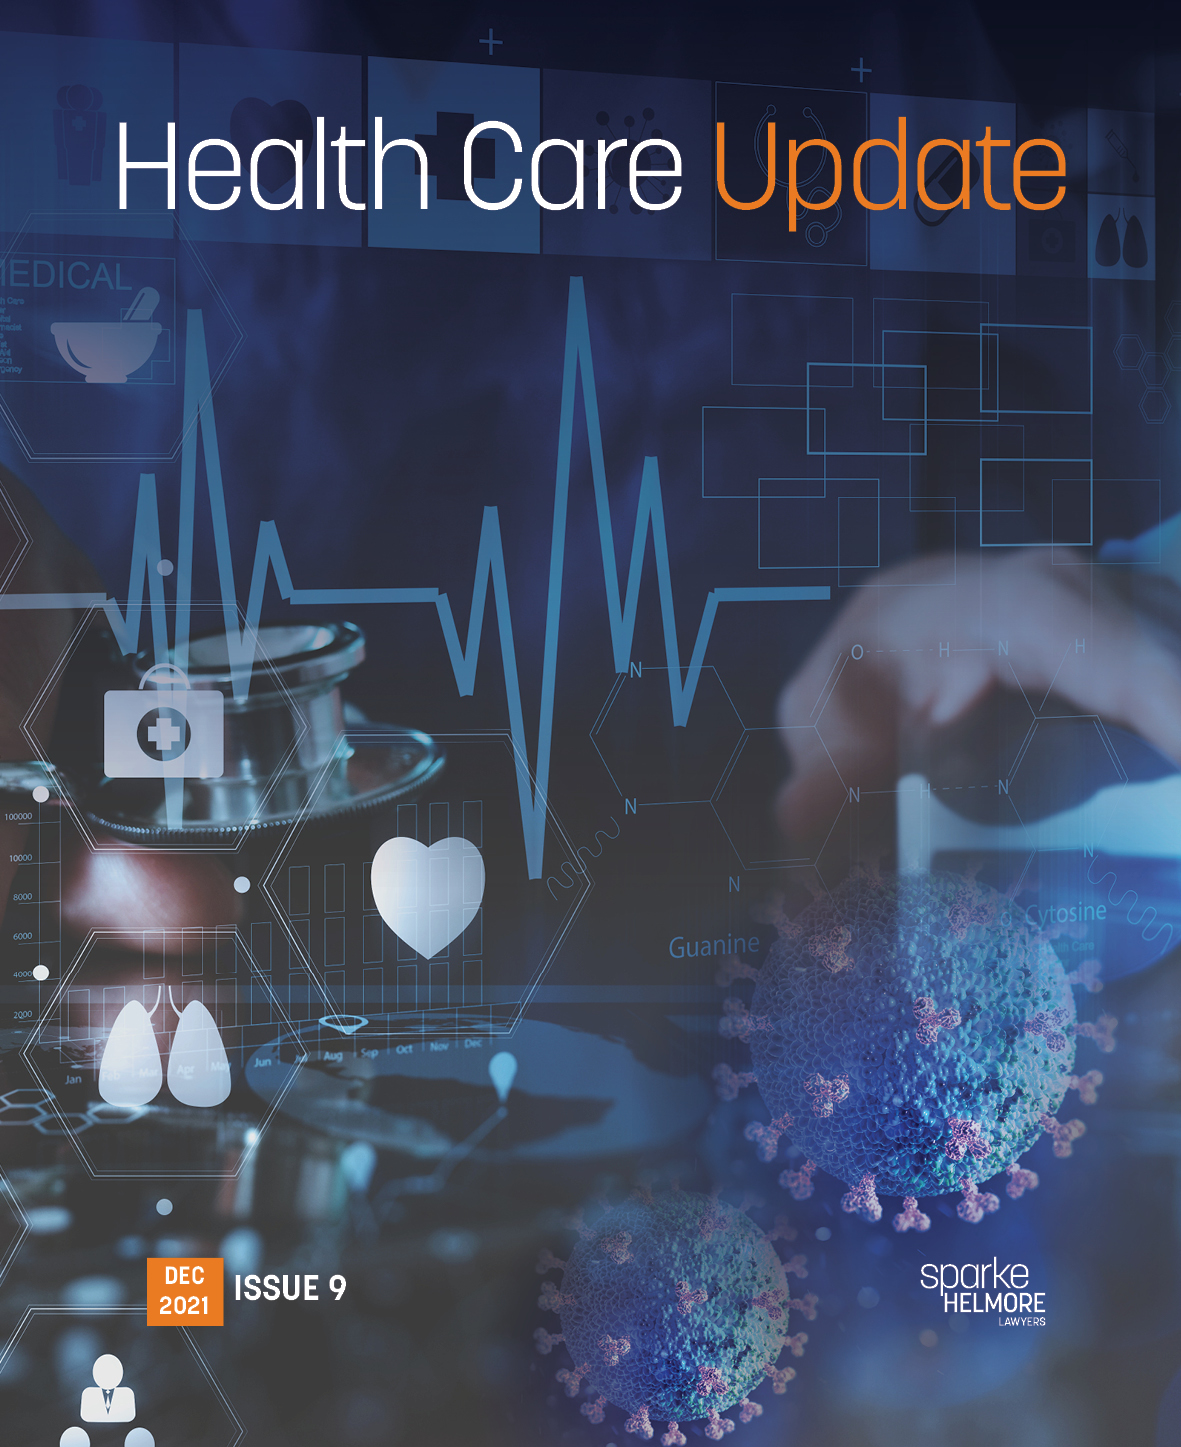 Health Care Update - Issue 9 - December 2021